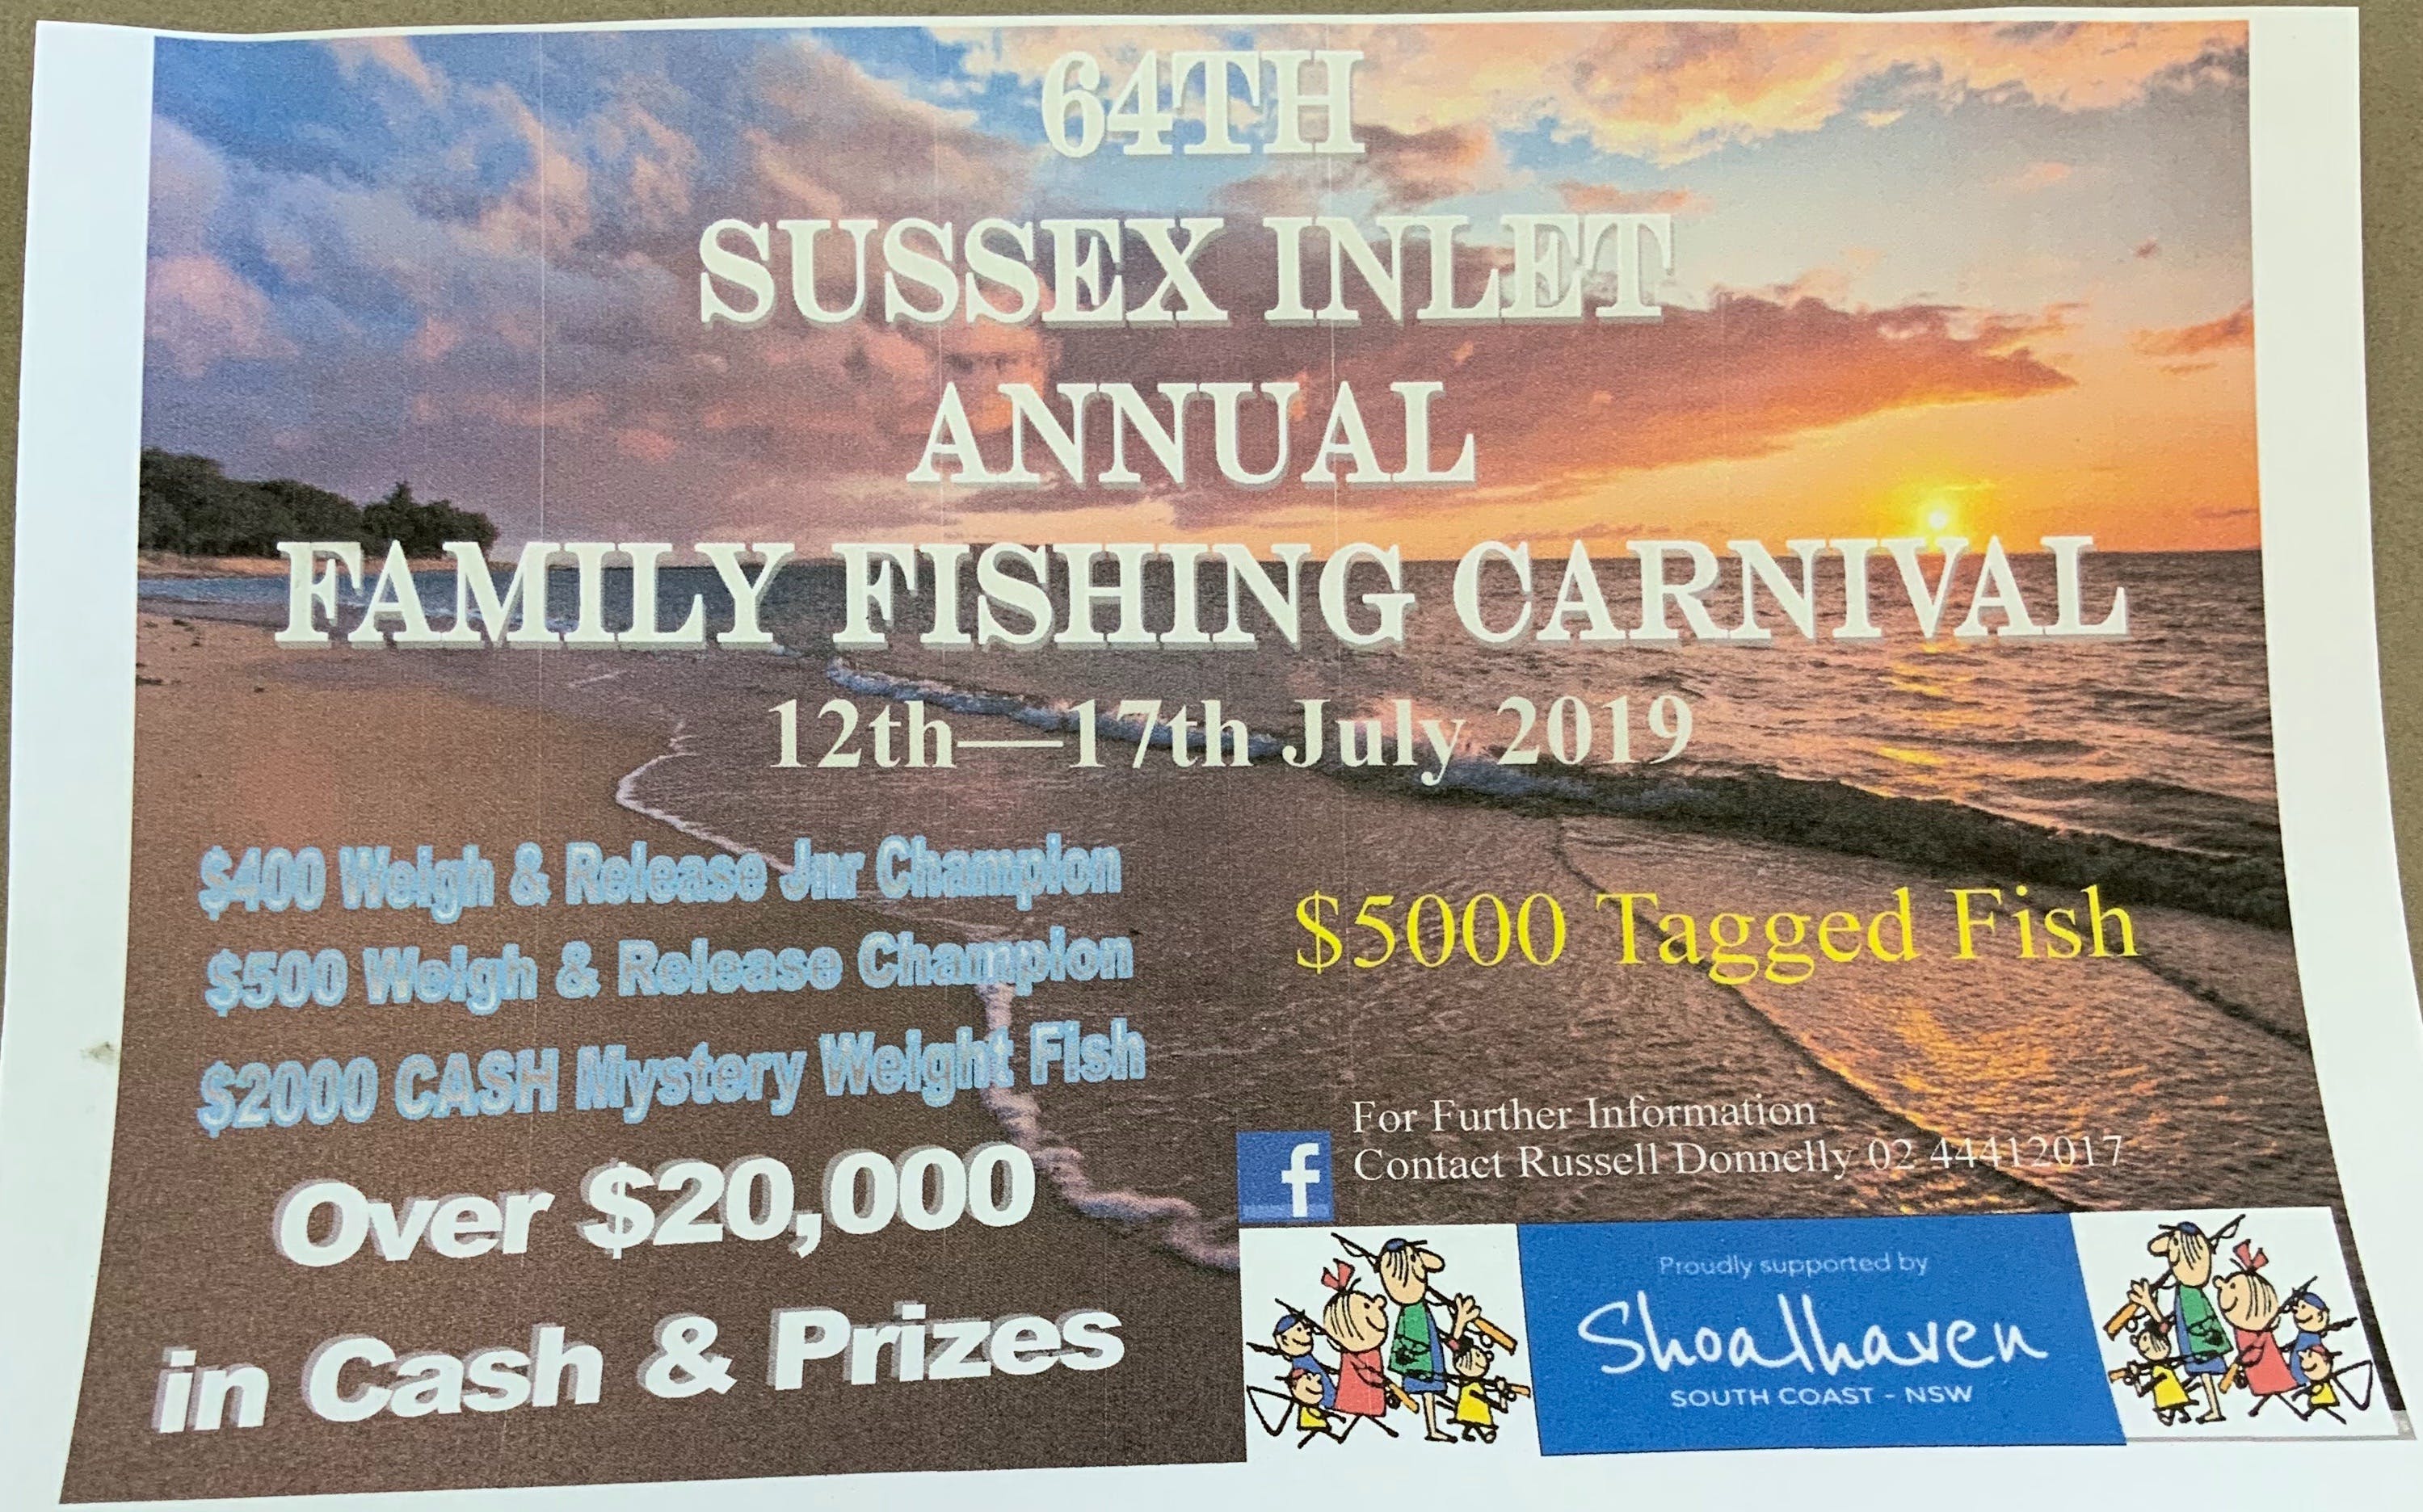 The Sussex Inlet Annual Family Fishing Carnival - Geraldton Accommodation